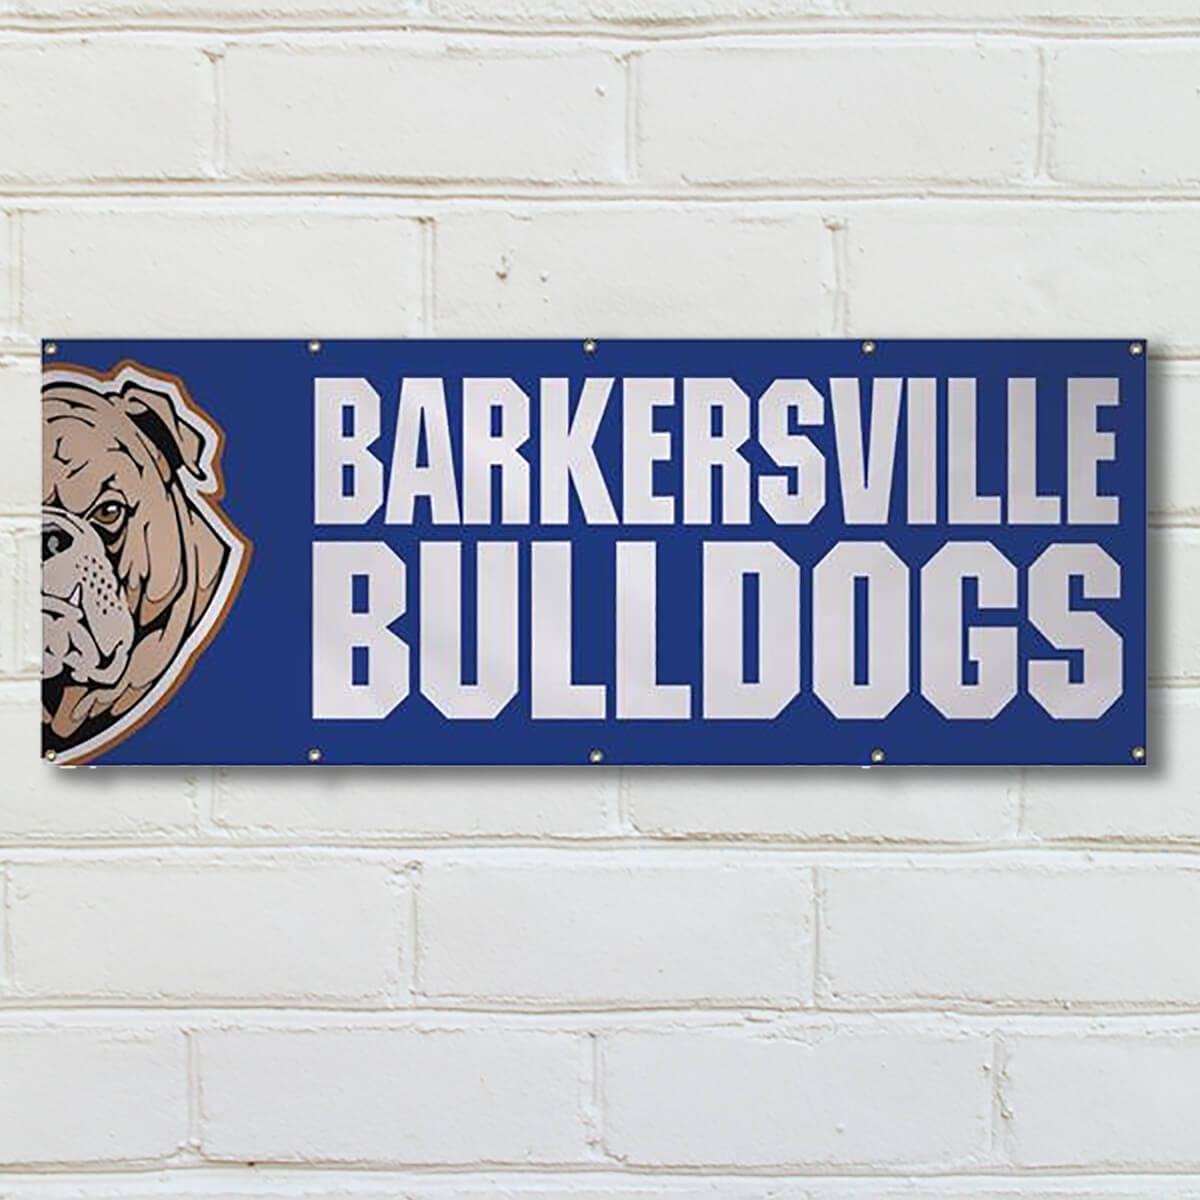 School mascot design vinyl banner and signs print by Curative Printing